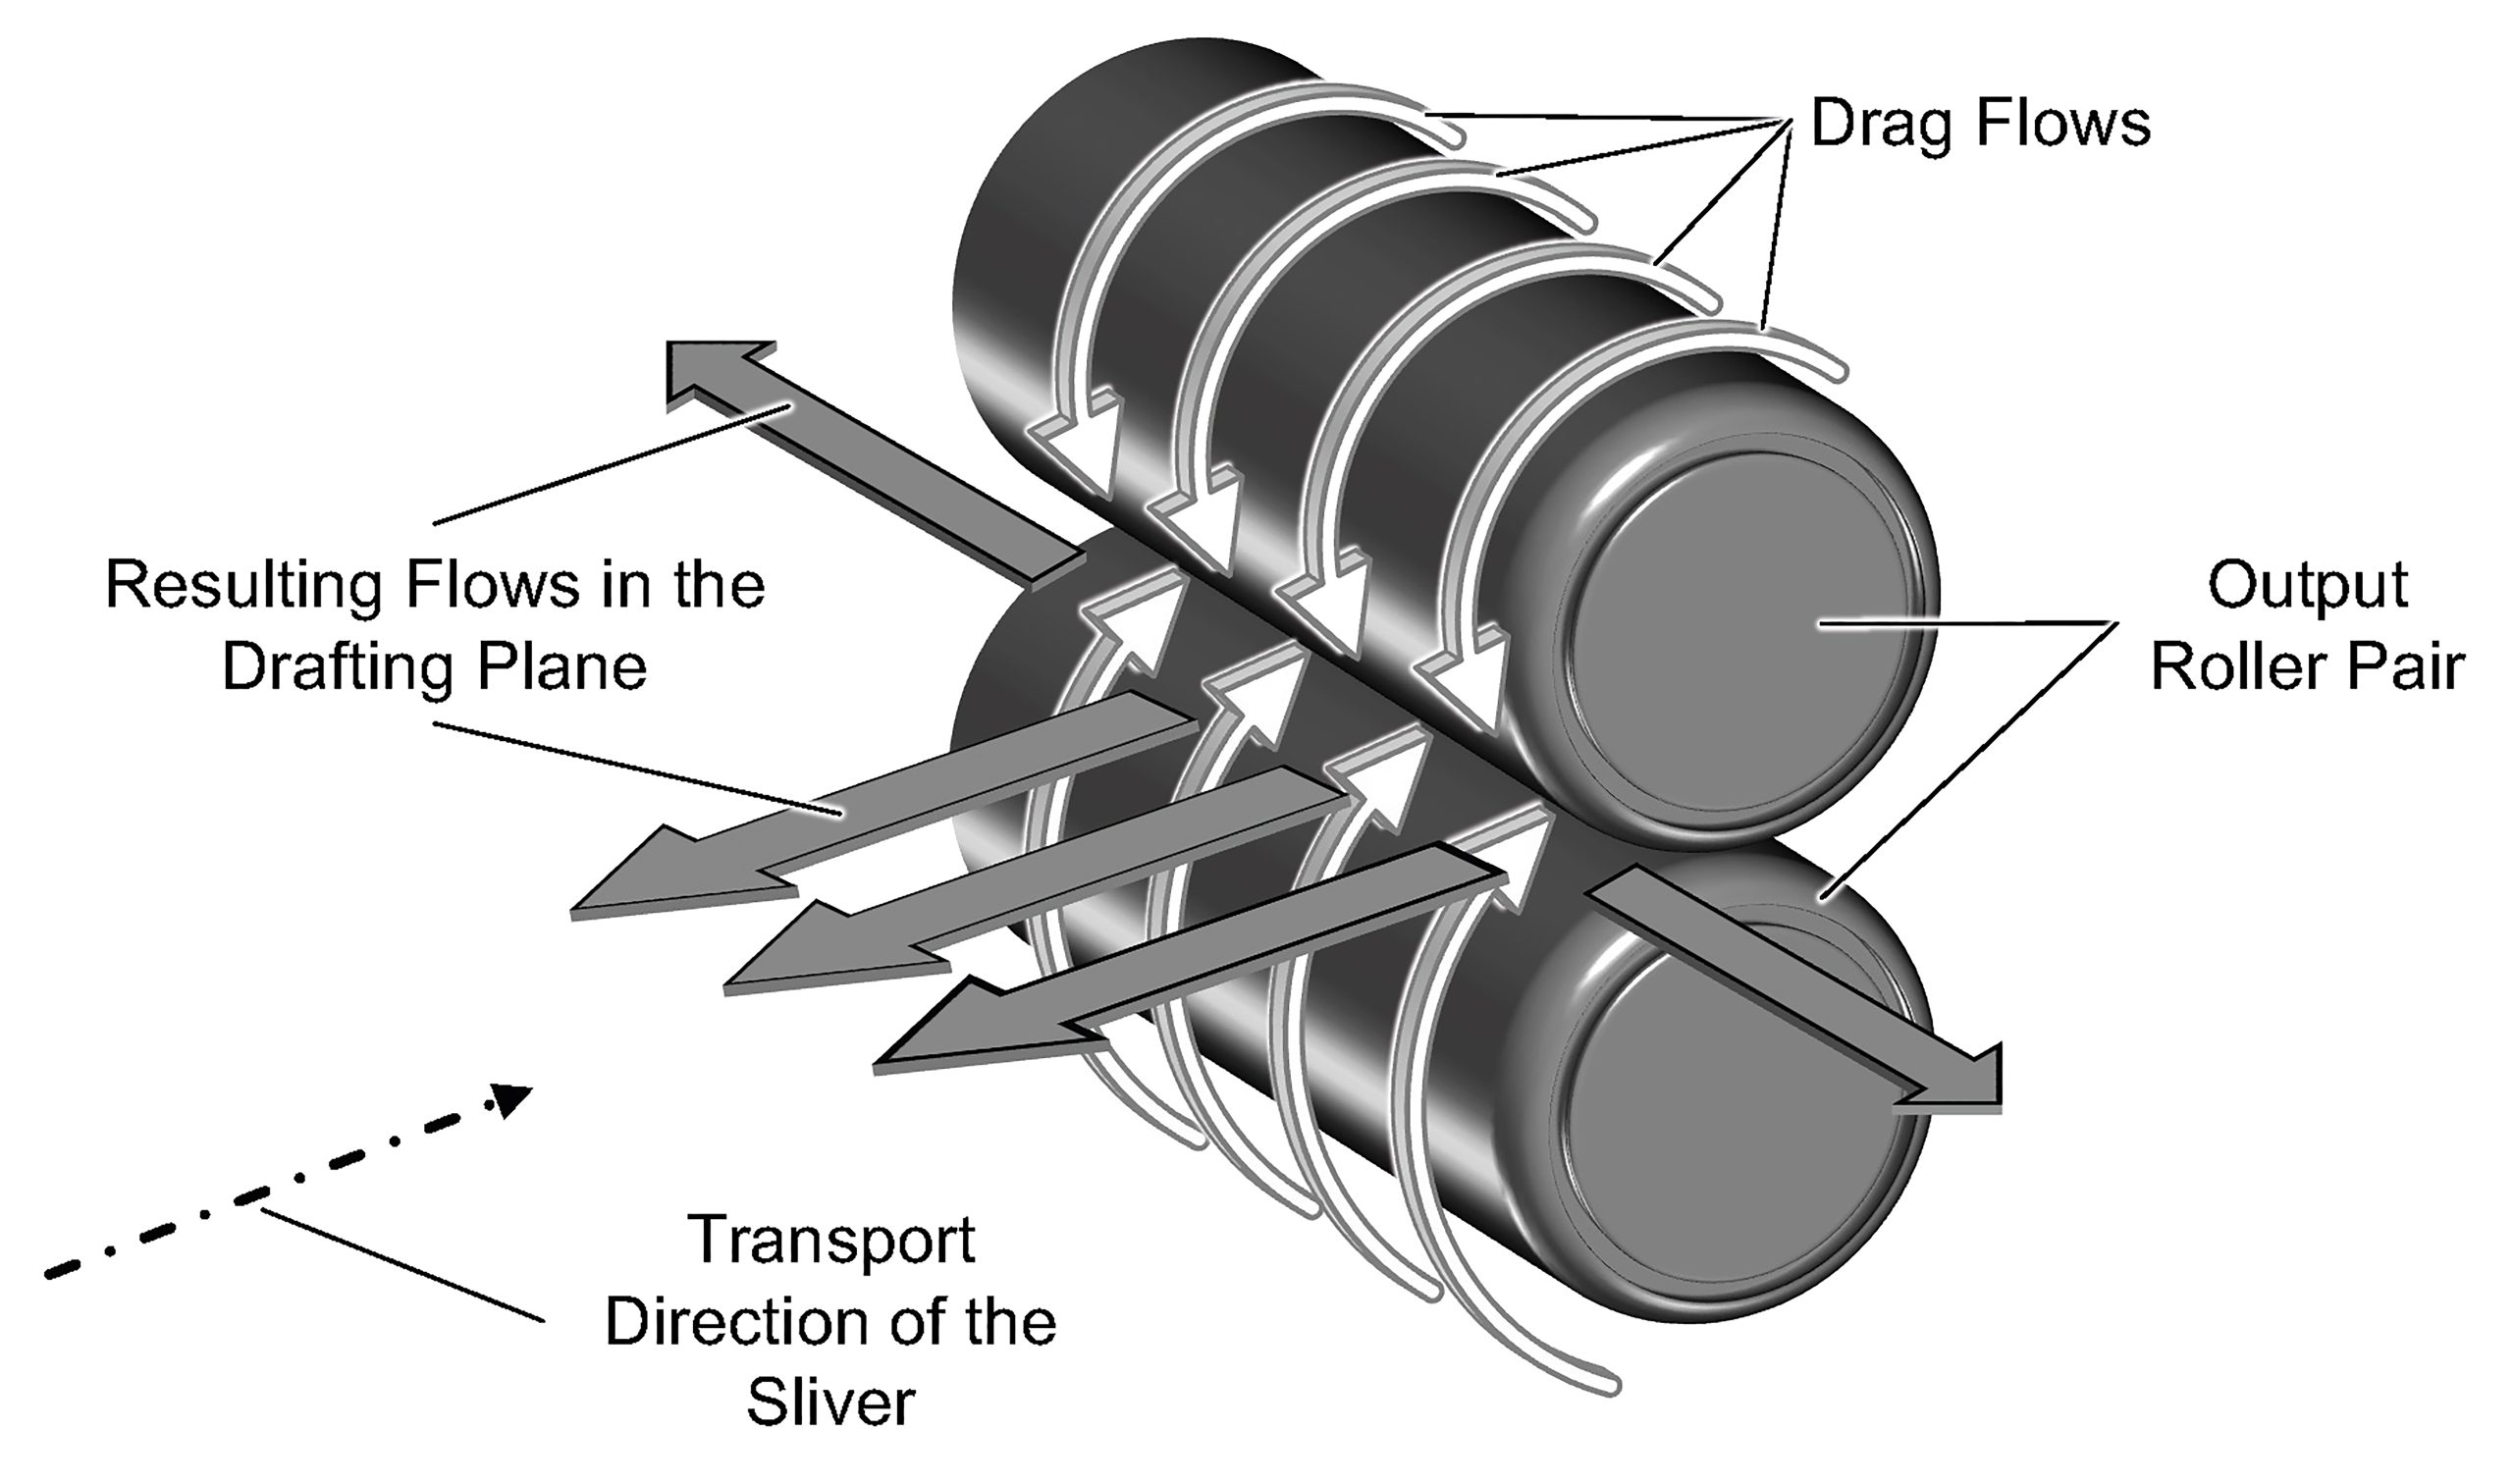 During the drafting of the sliver, drag flows form at the pair of output rolls, which flow out in the nip area both axially and in the opposite direction to the fiber transport direction (Figure 4)   Image Source: ITA - Institut für Textiltechnik of RWTH Aachen University